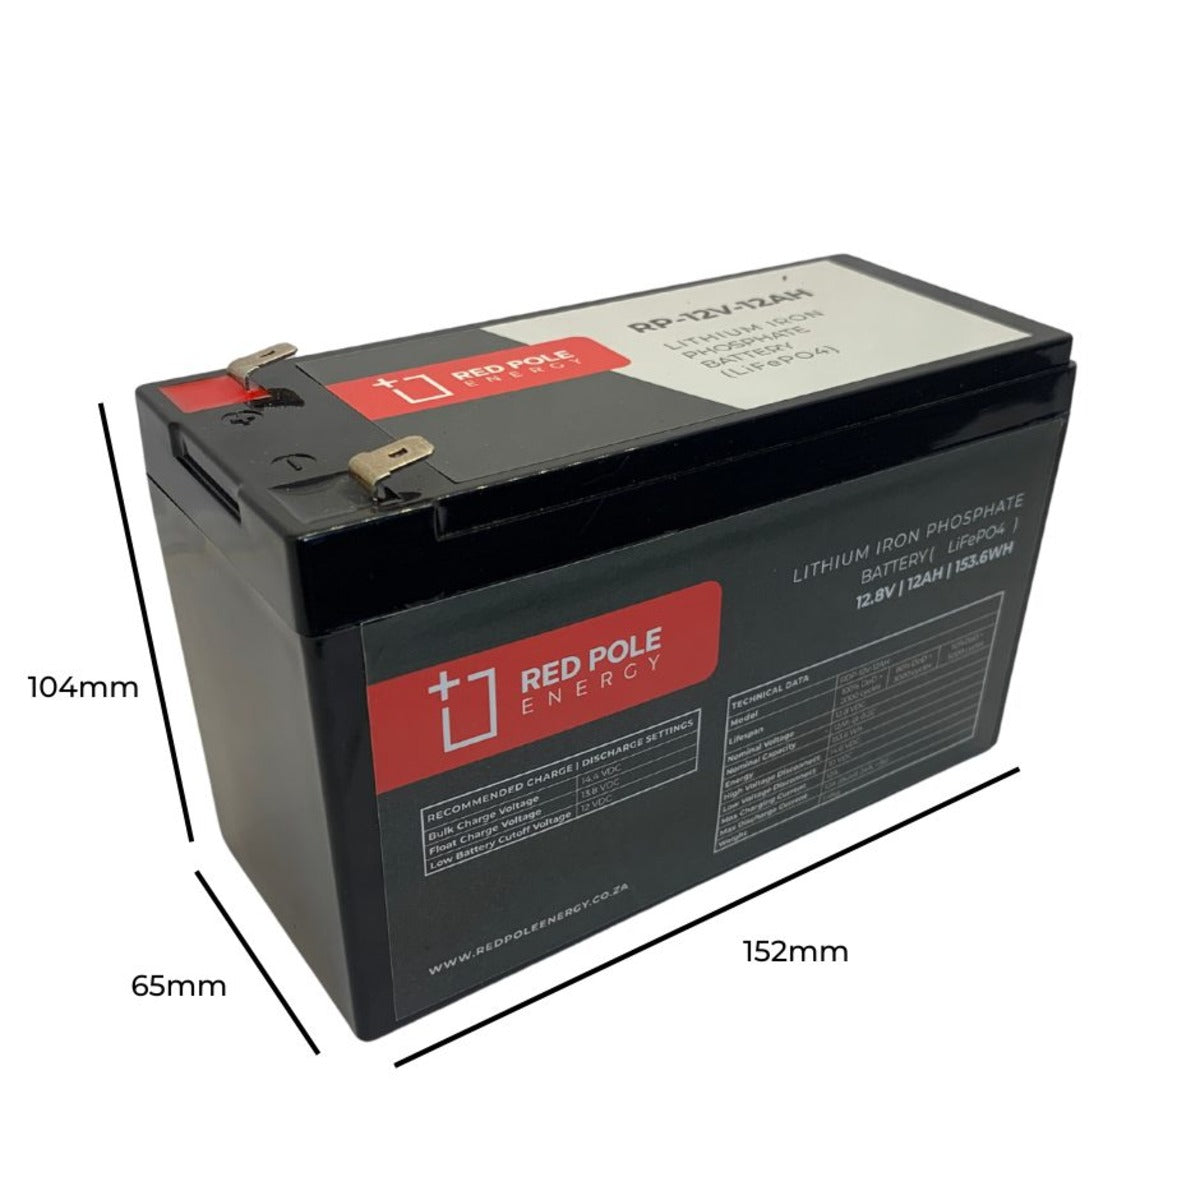 Red Pole Energy 12V 12Ah 153Wh LiFePO4 Battery